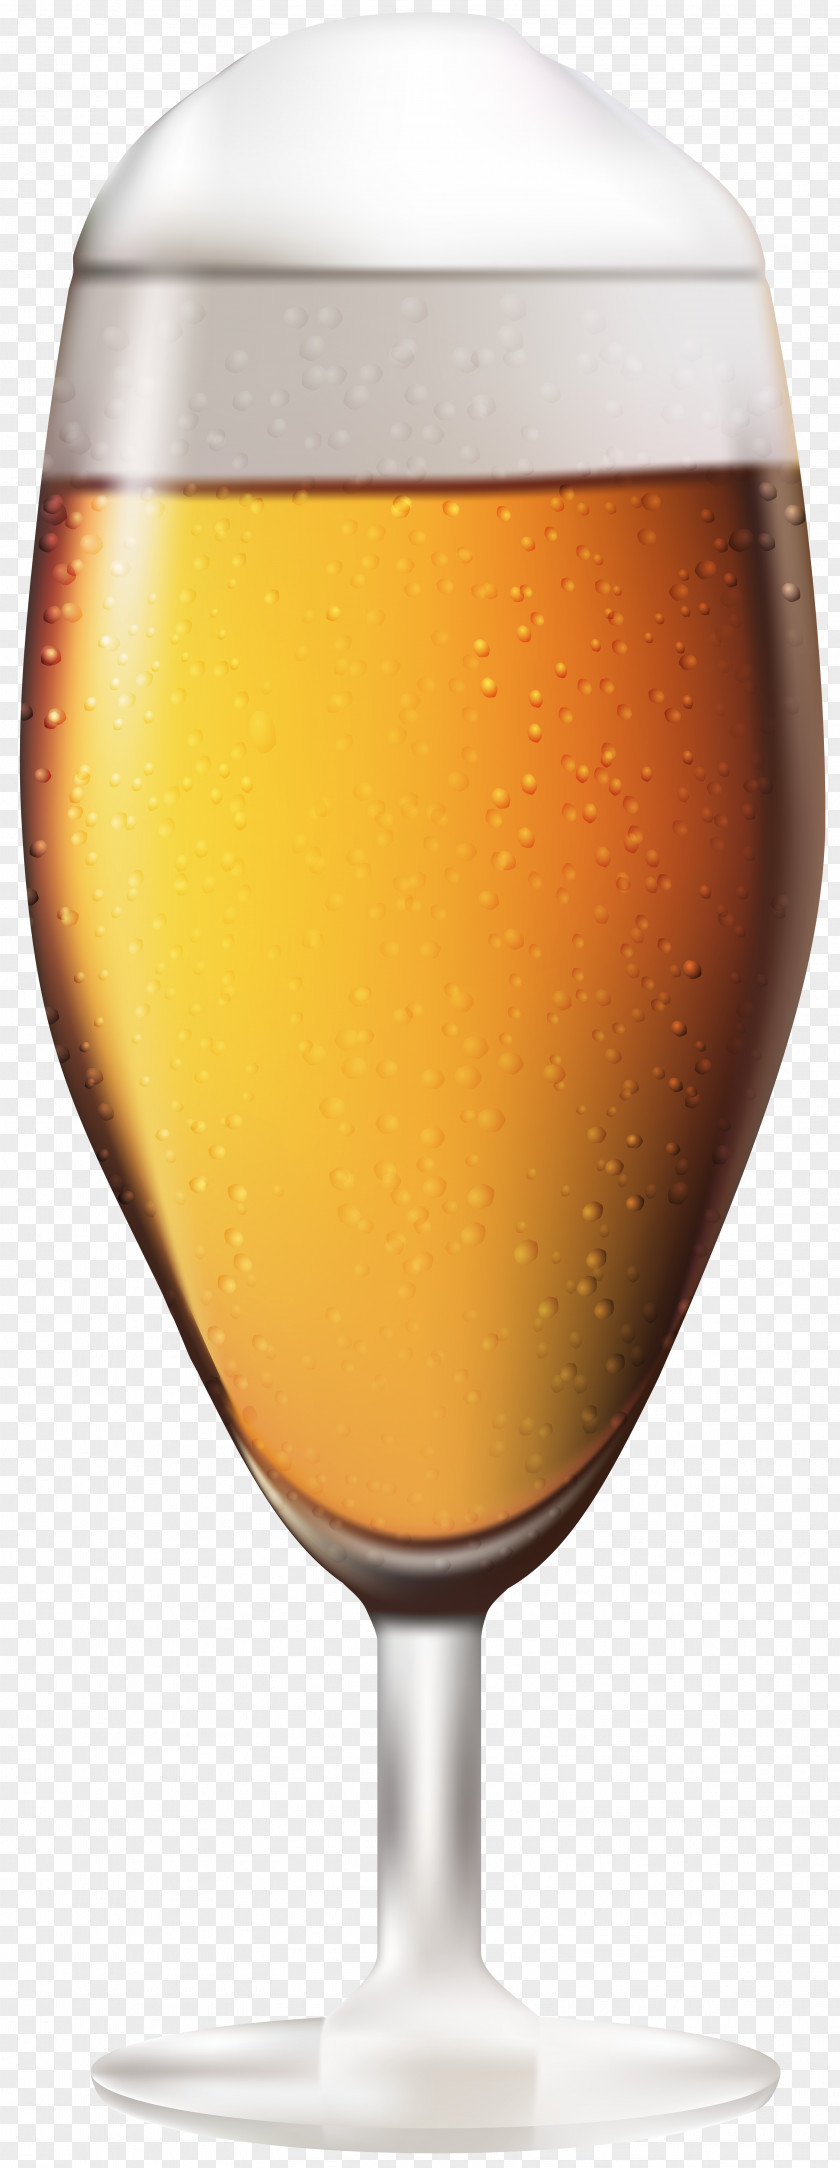 Sodas Streamer Beer Glasses Wine Glass Imperial Pint PNG